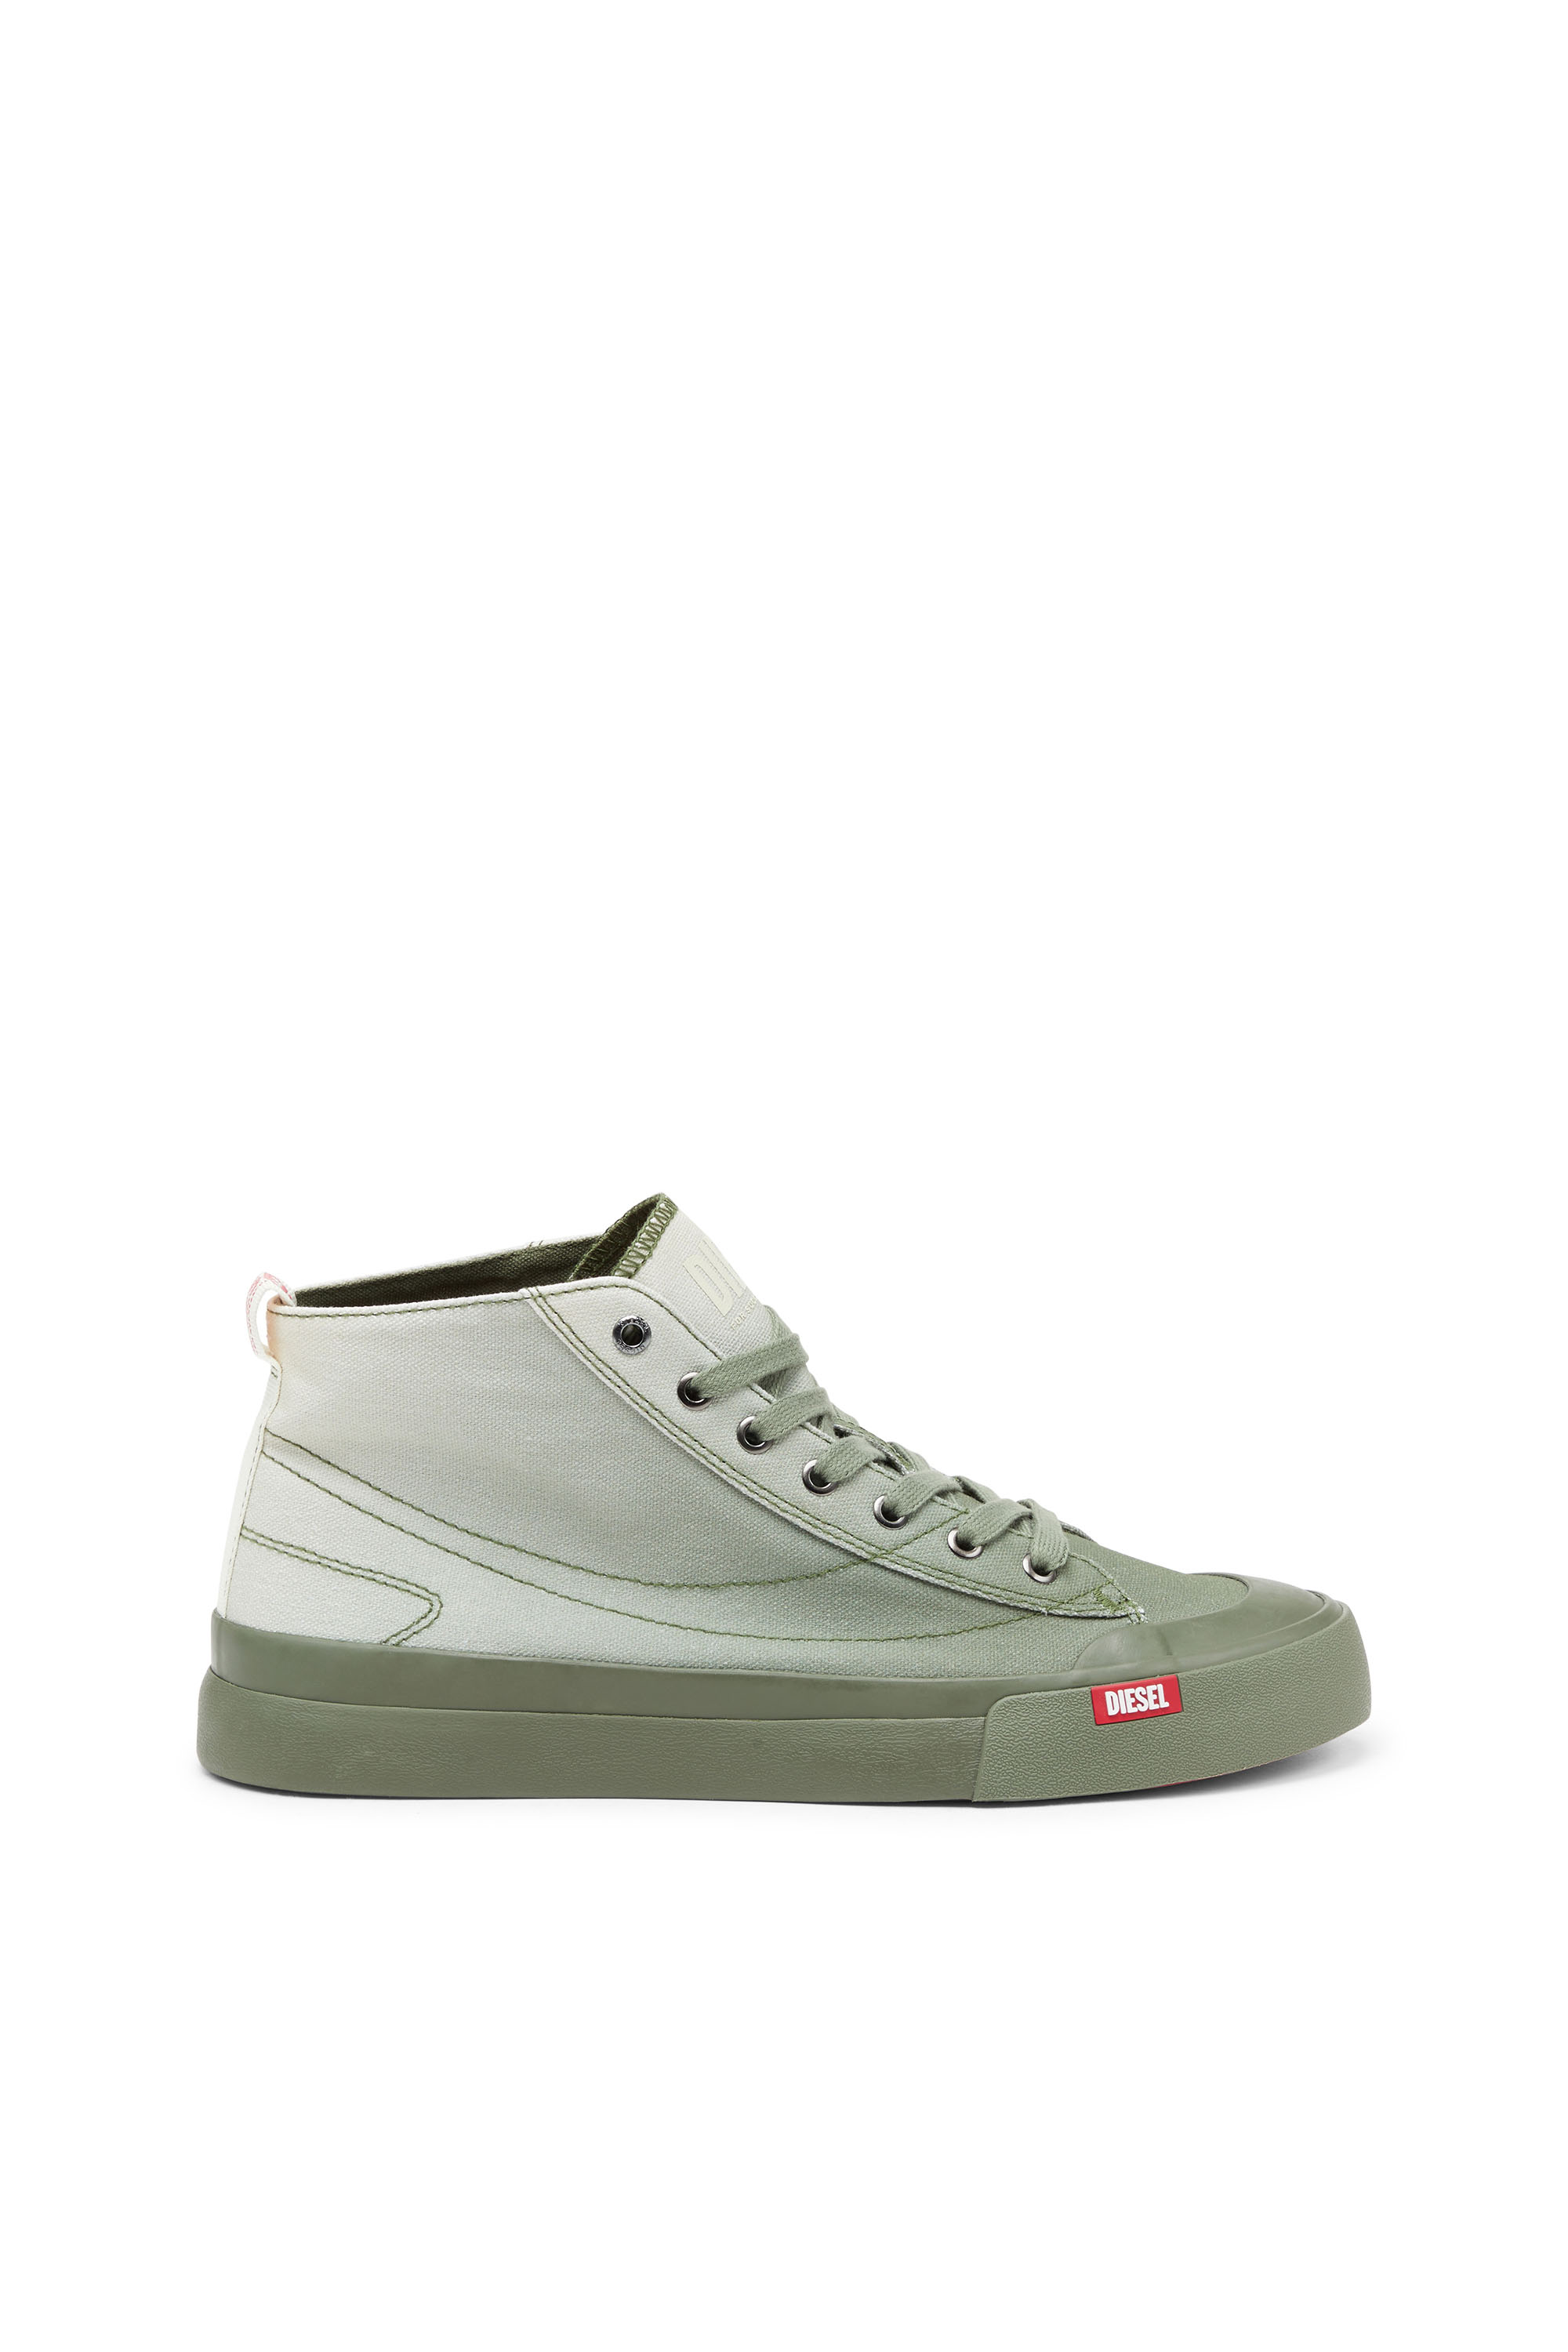 Diesel - S-ATHOS MID, Man S-Athos Mid-High-top sneakers in faded canvas in Multicolor - Image 1